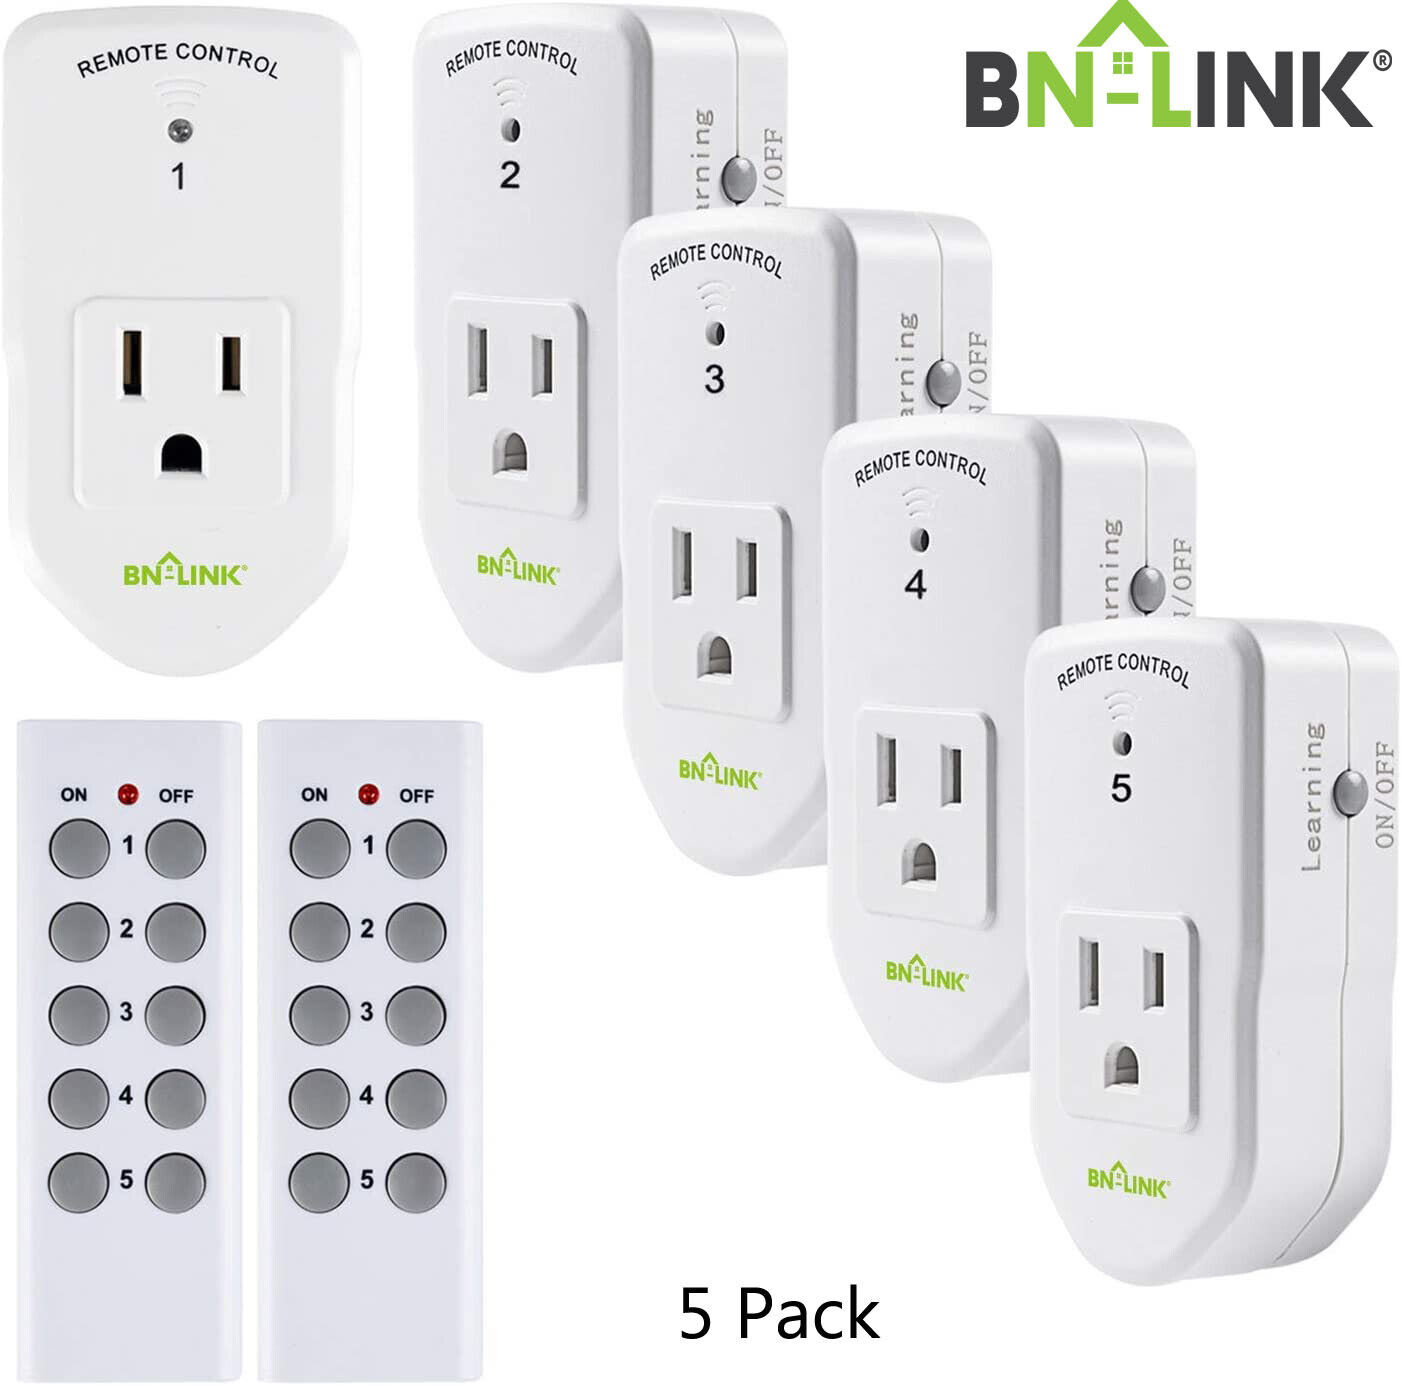 BN-LINK 5 Pack Wireless Remote Control Outlet Switch Power Plug In for lights